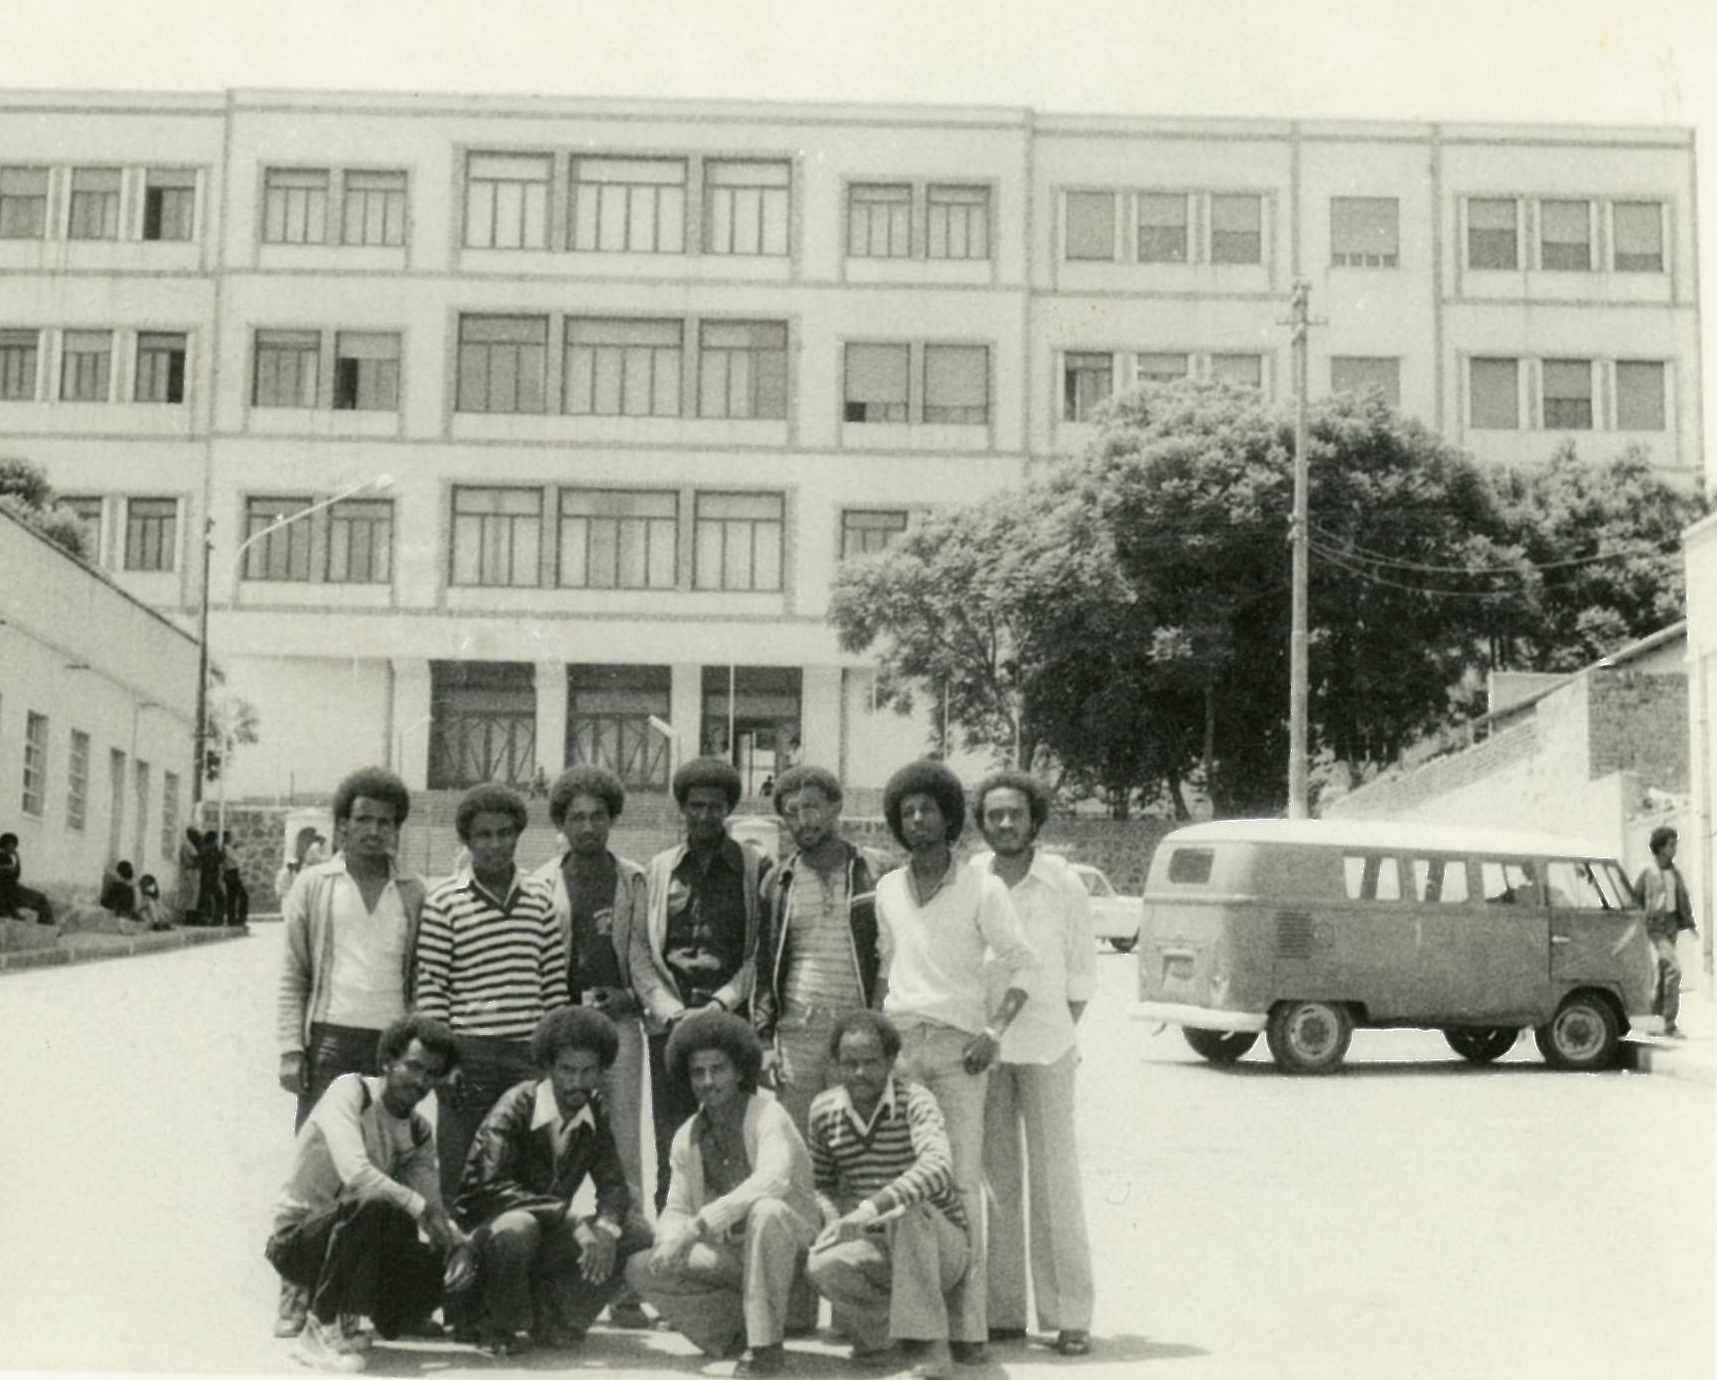 Black and white photo of group of black men posing in front of building